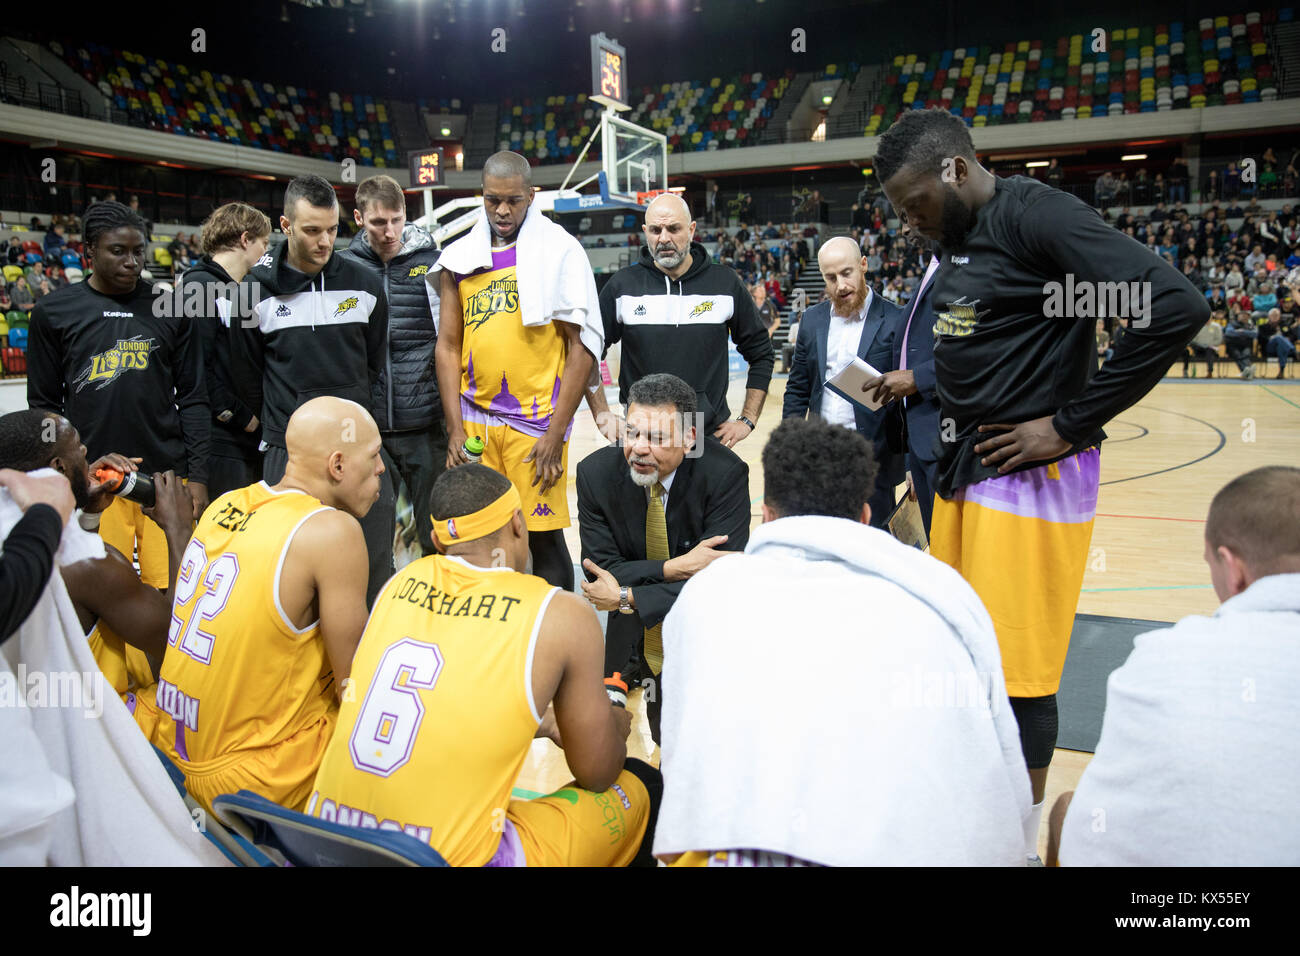 Copper Box Arena, London, UK, 7th Jan 2018.  London Lions v Sheffield Sharks British Basketball League game in the Copper Box Arena at the Queen Elizabeth Olympic Park in London. Lions' coach Vince Macaulay talks to the team. Lions win 81 - 73. copyright Carol Moir/AlamyLiveNews Stock Photo